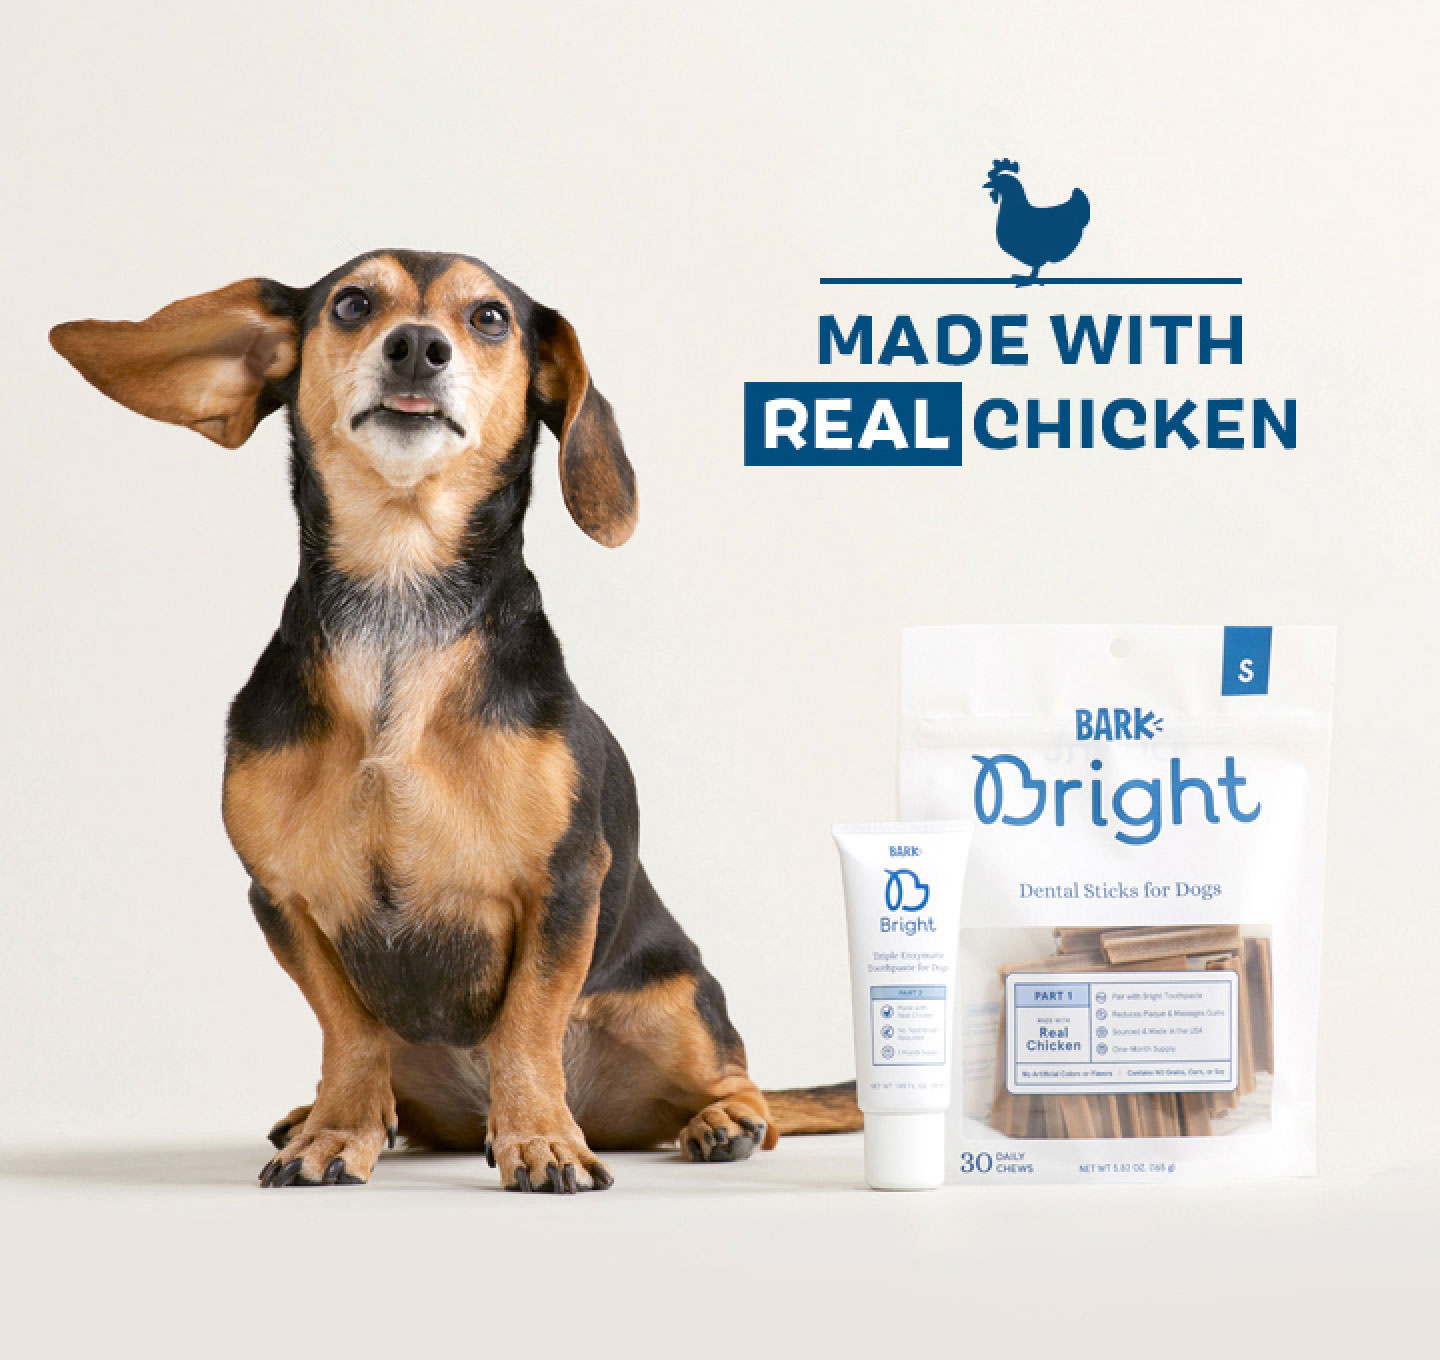 Bright Dental Kit Contents and dog. Made with real chicken